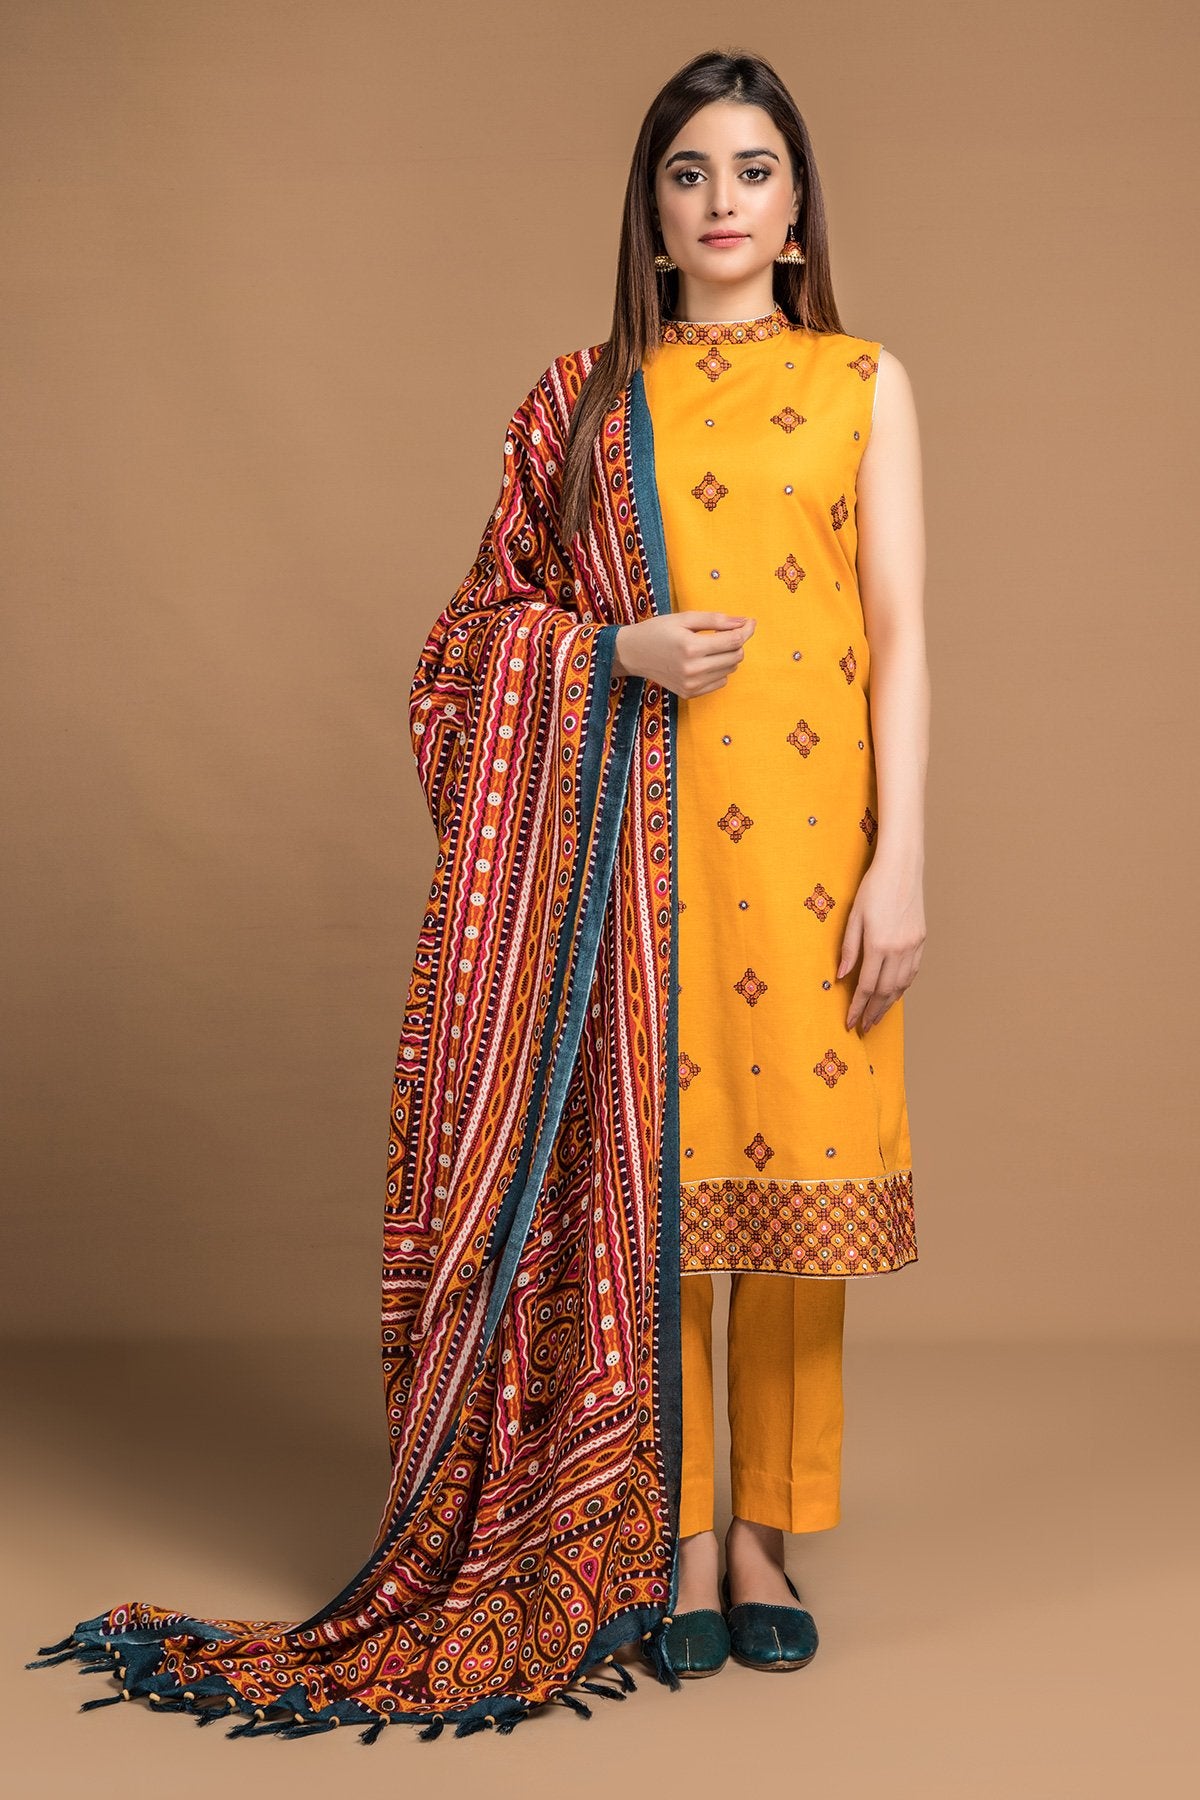 Dyed & Embroidered 3 Pcs Suit with wool shawl